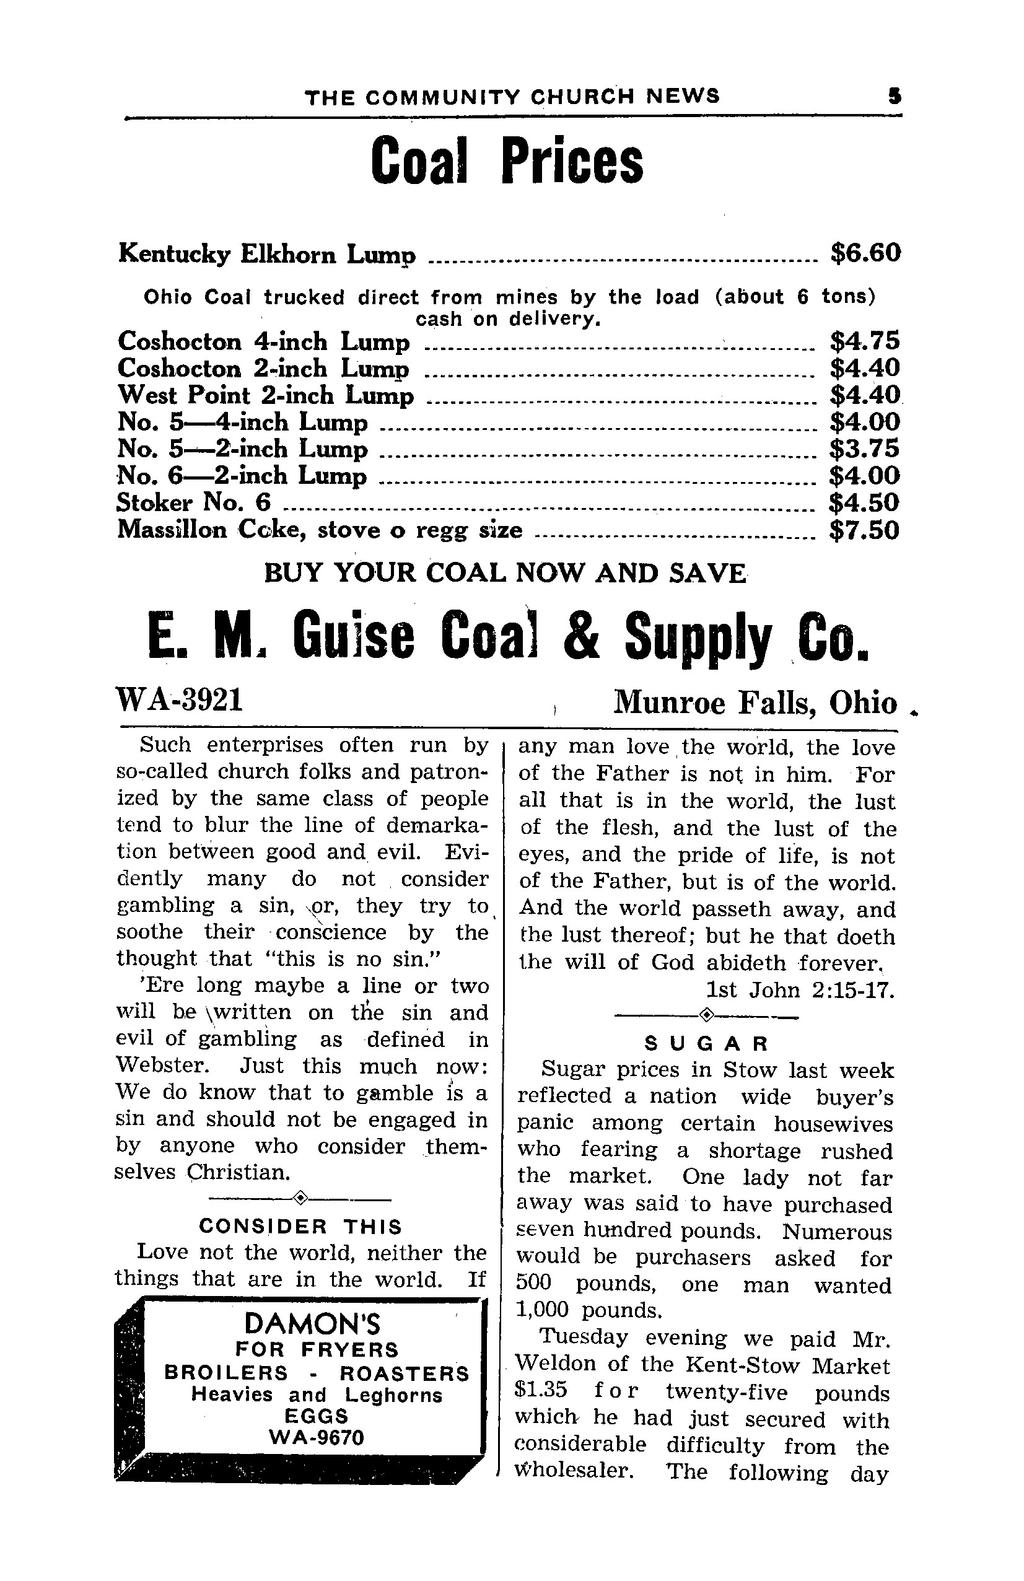 Coal Prices Kentucky Elkhorn Lump $6.60 Ohio Coal trucked direct from mines by the load (about 6 tons) cash on delivery. Coshocton 4-inch Lump $4.75 Coshocton 2-inch Lump $4.